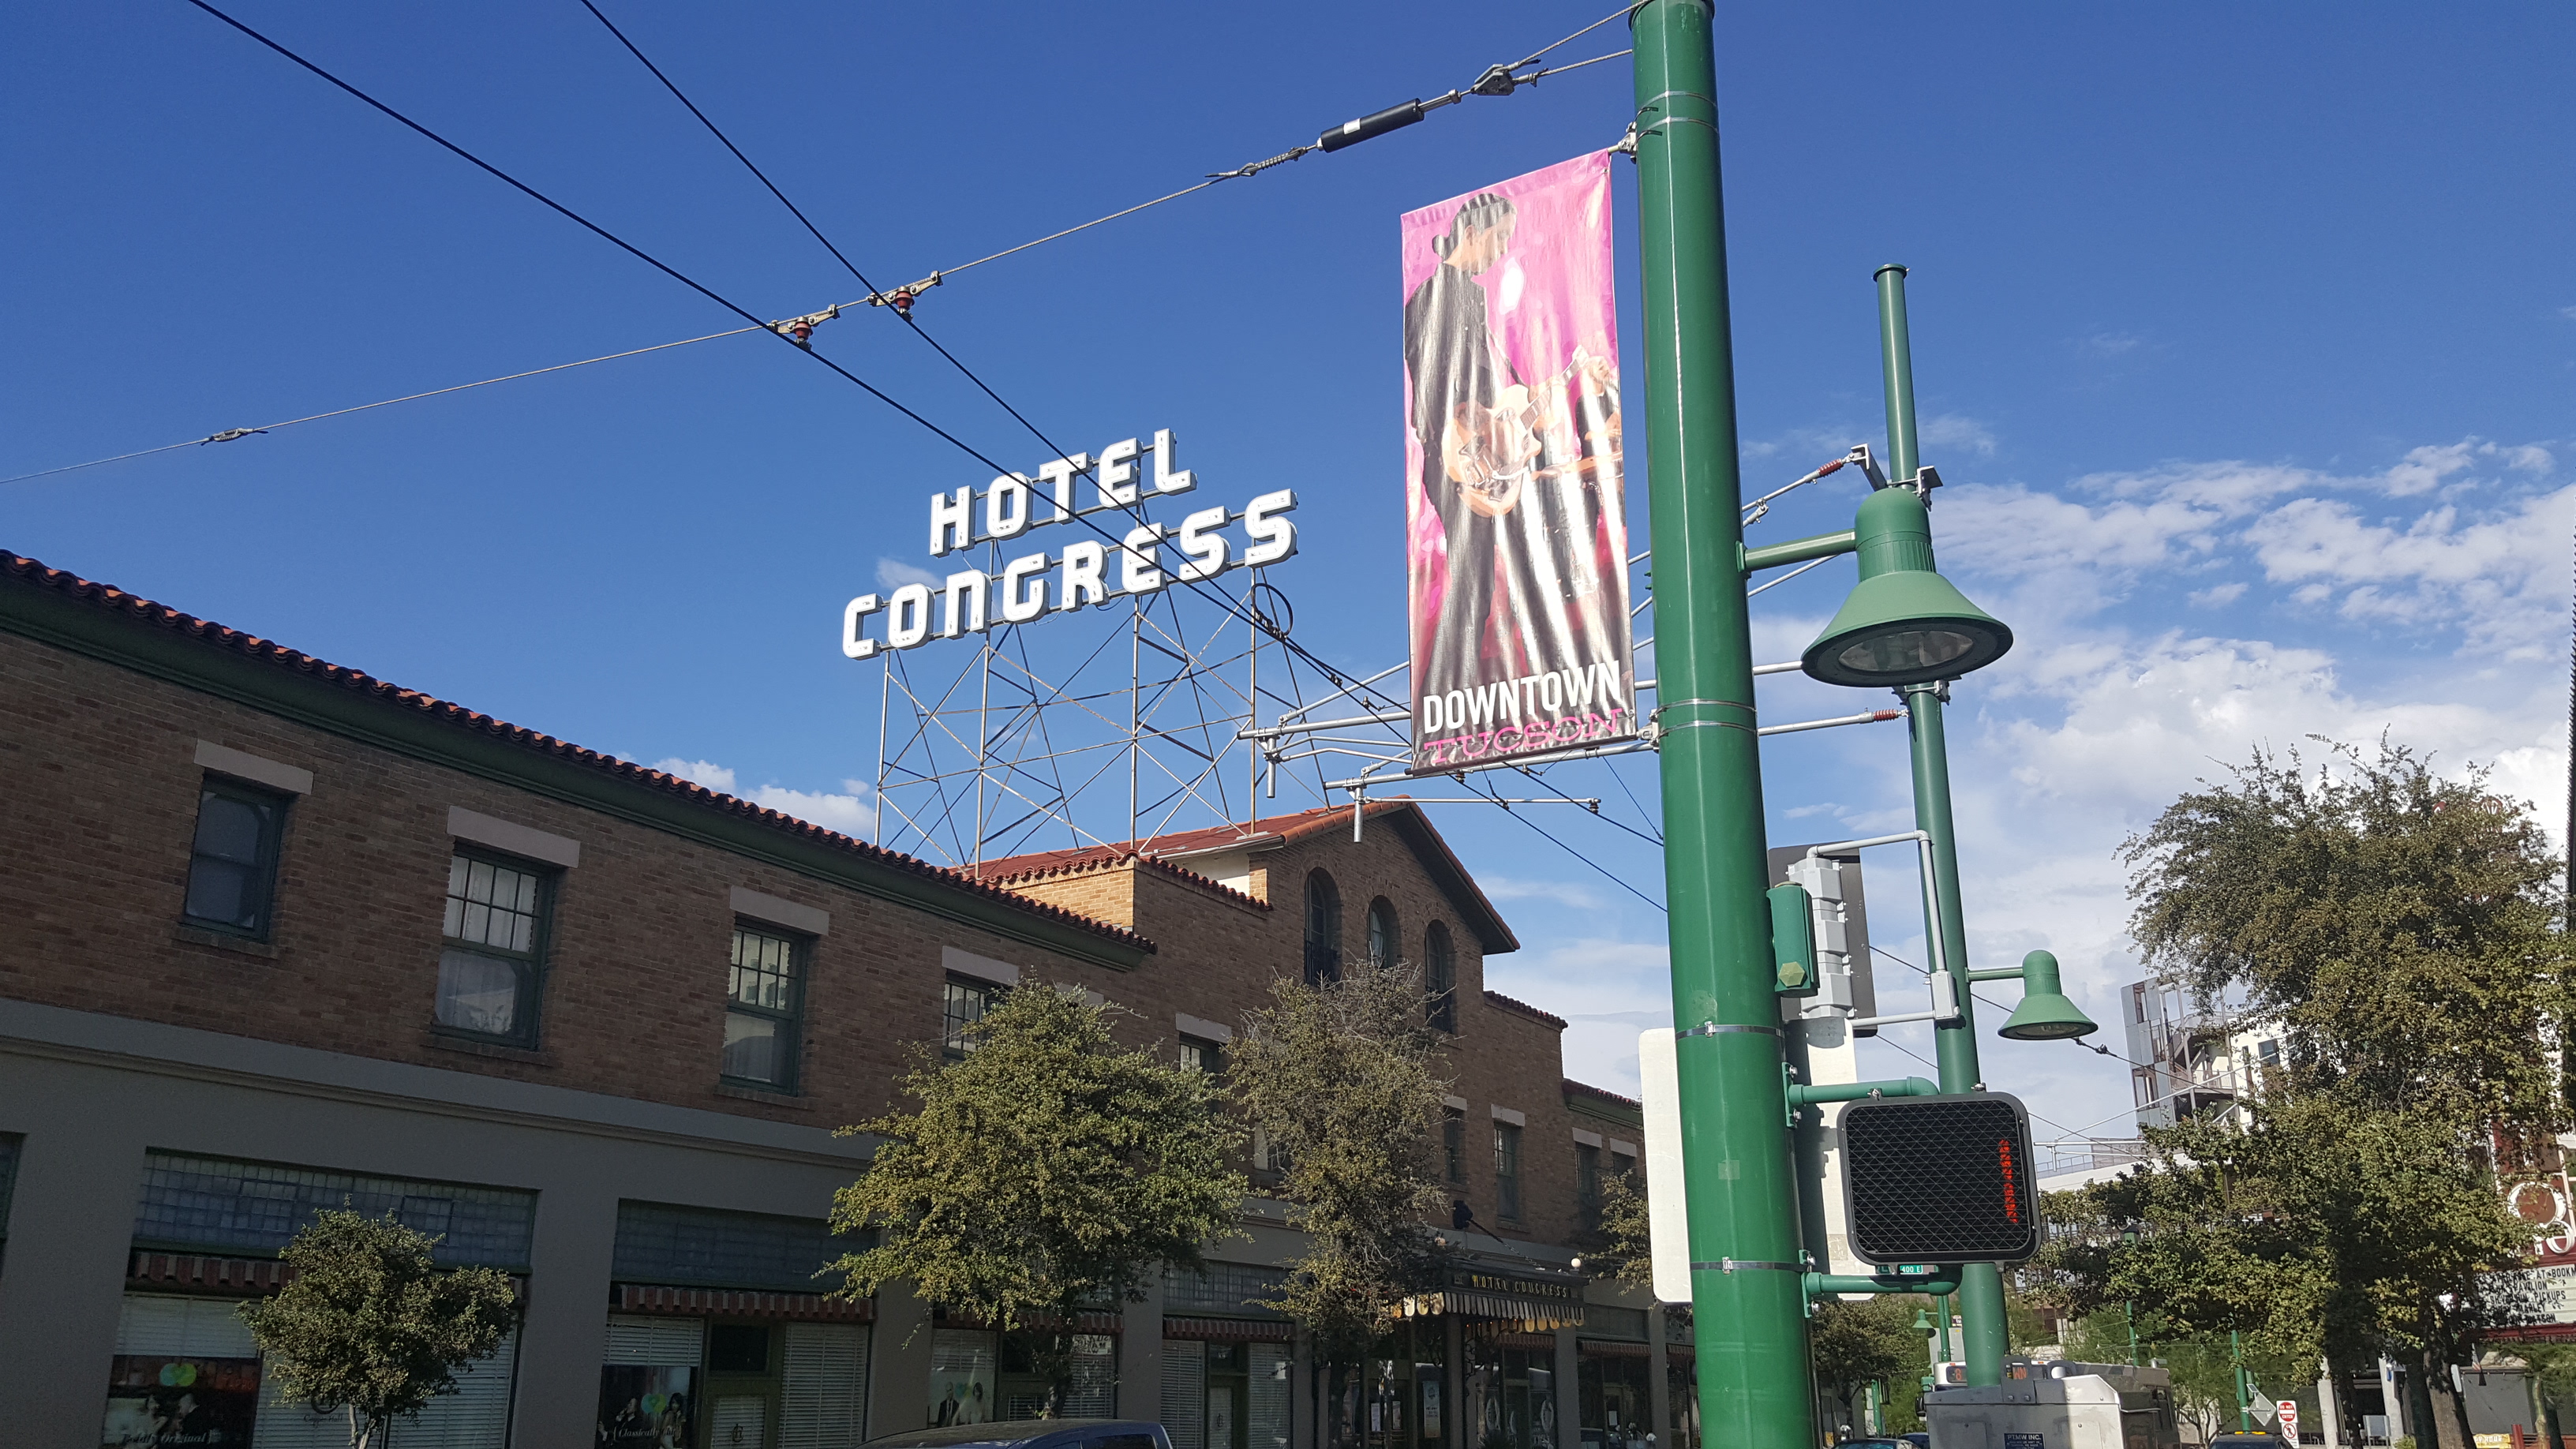 Hotel Congress, Downtown Tucson